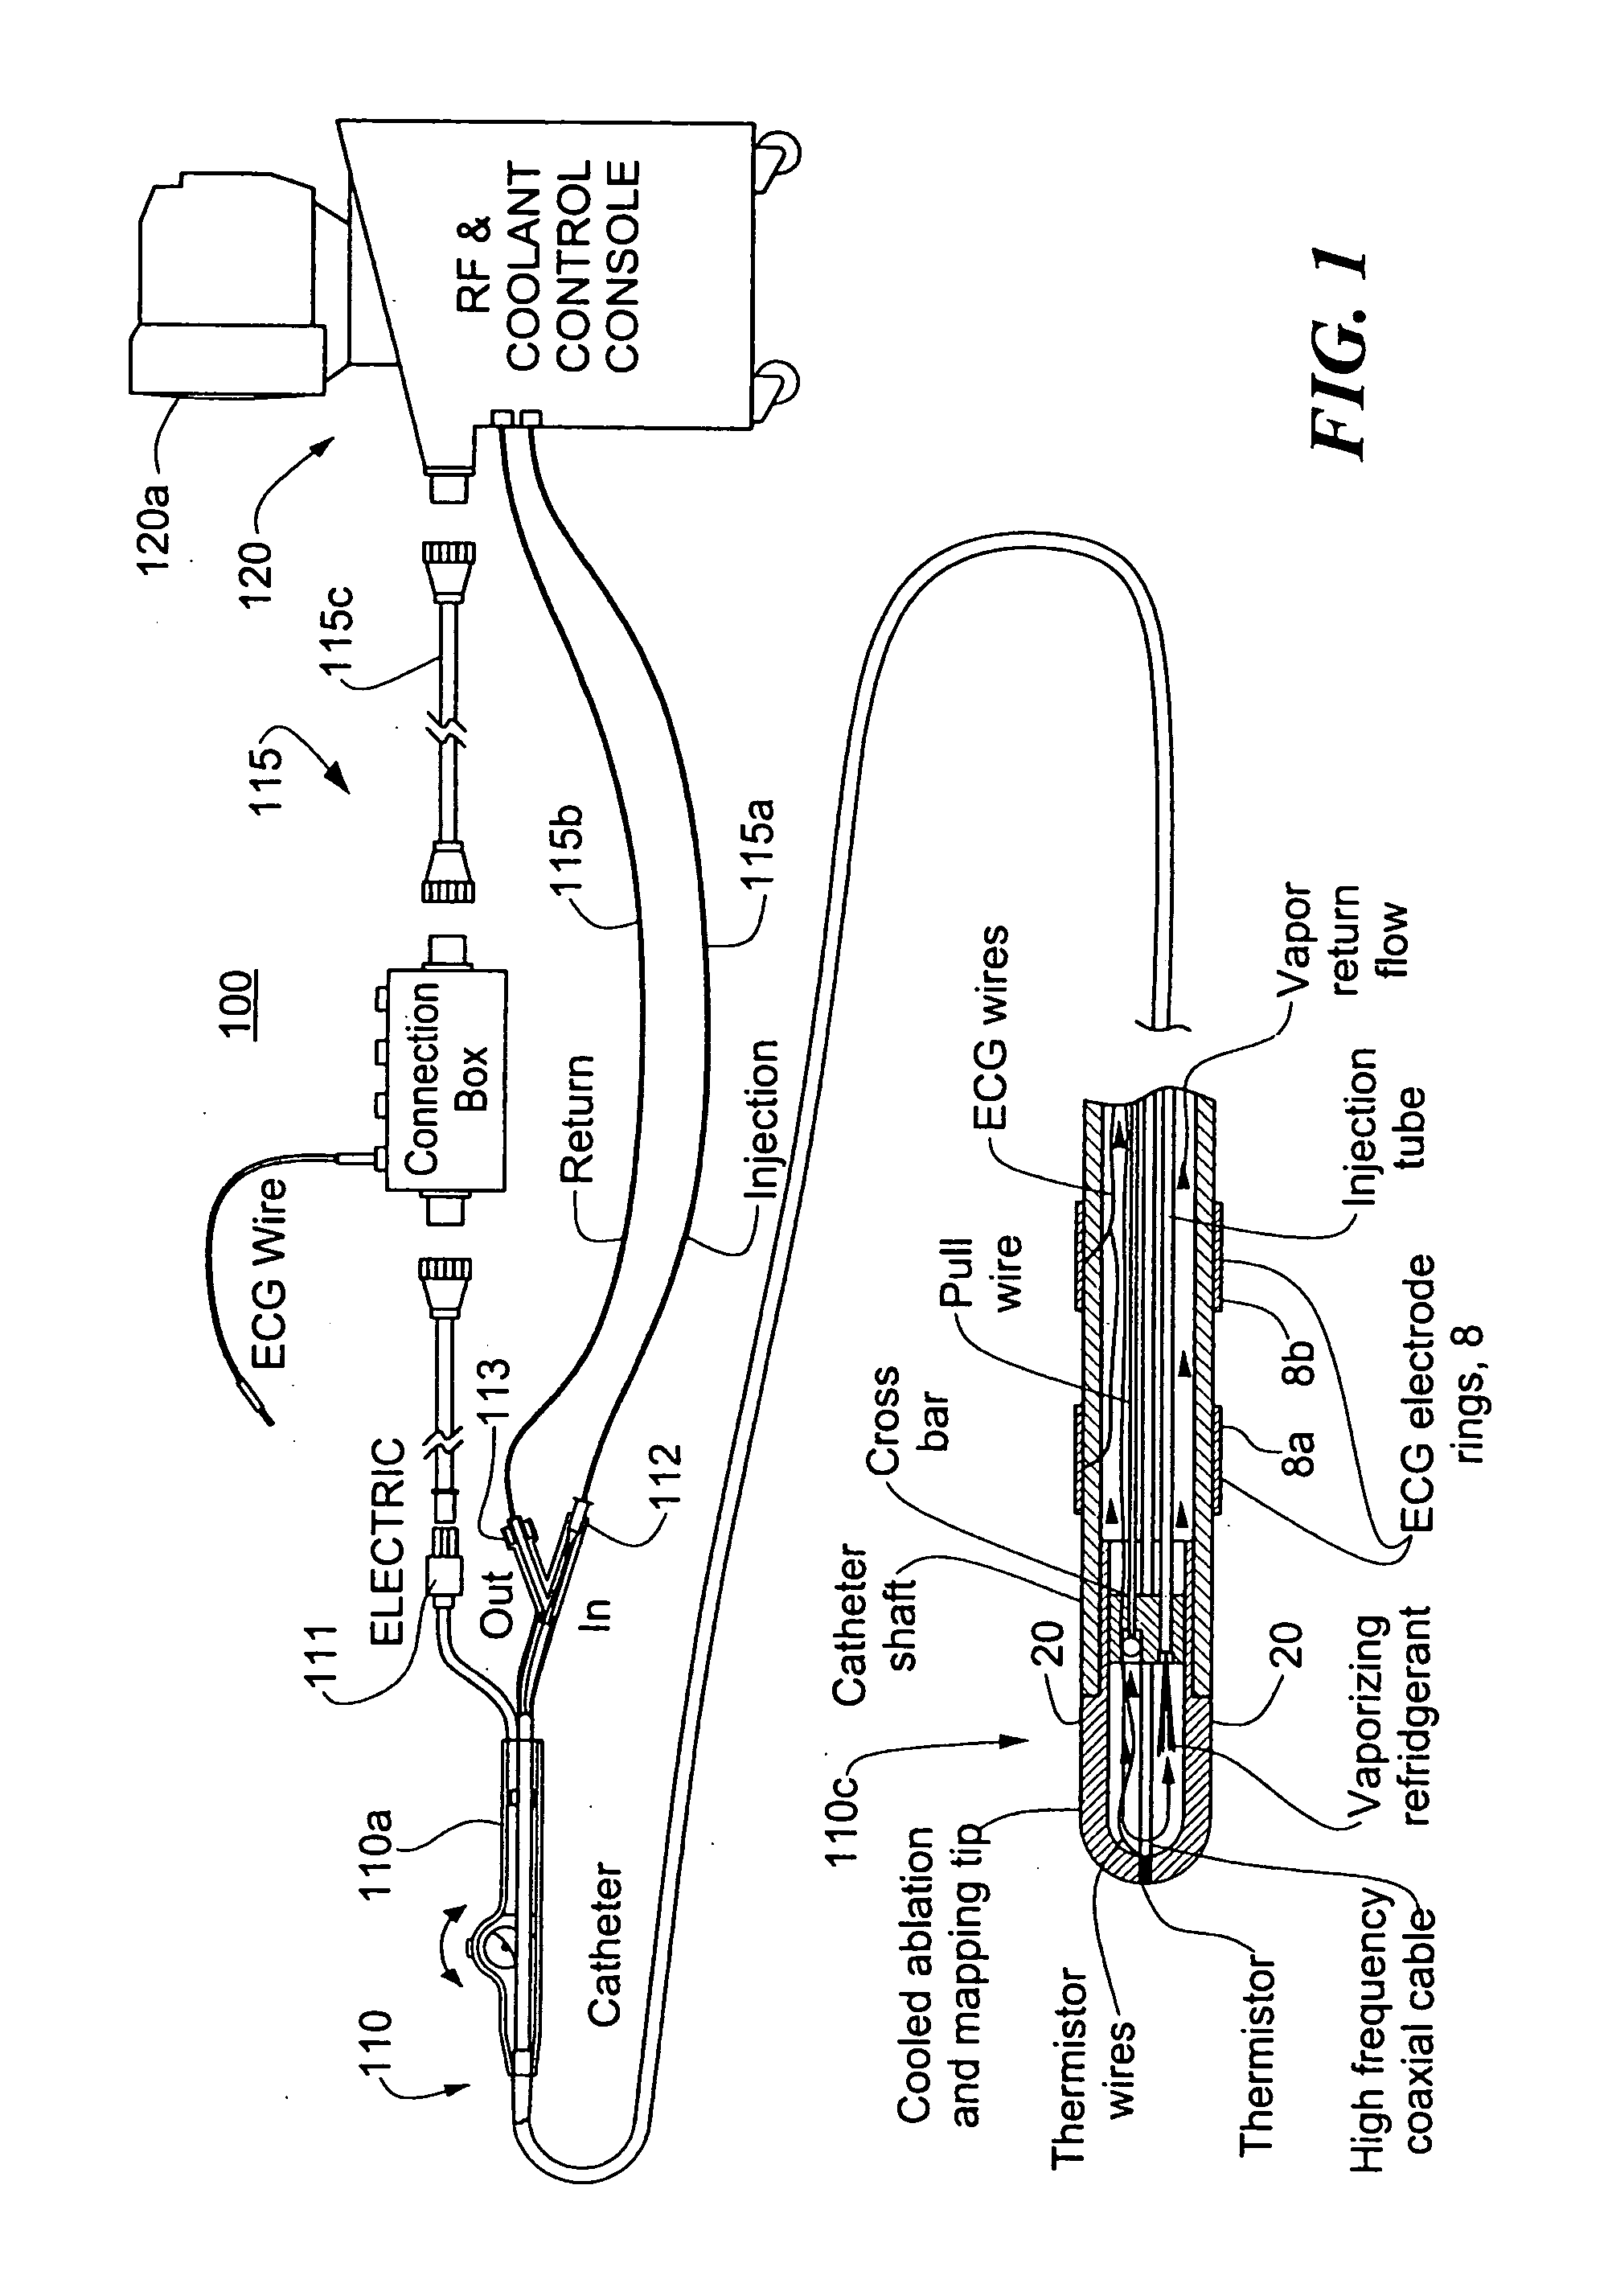 Catheter with cryogenic and electrical heating ablation